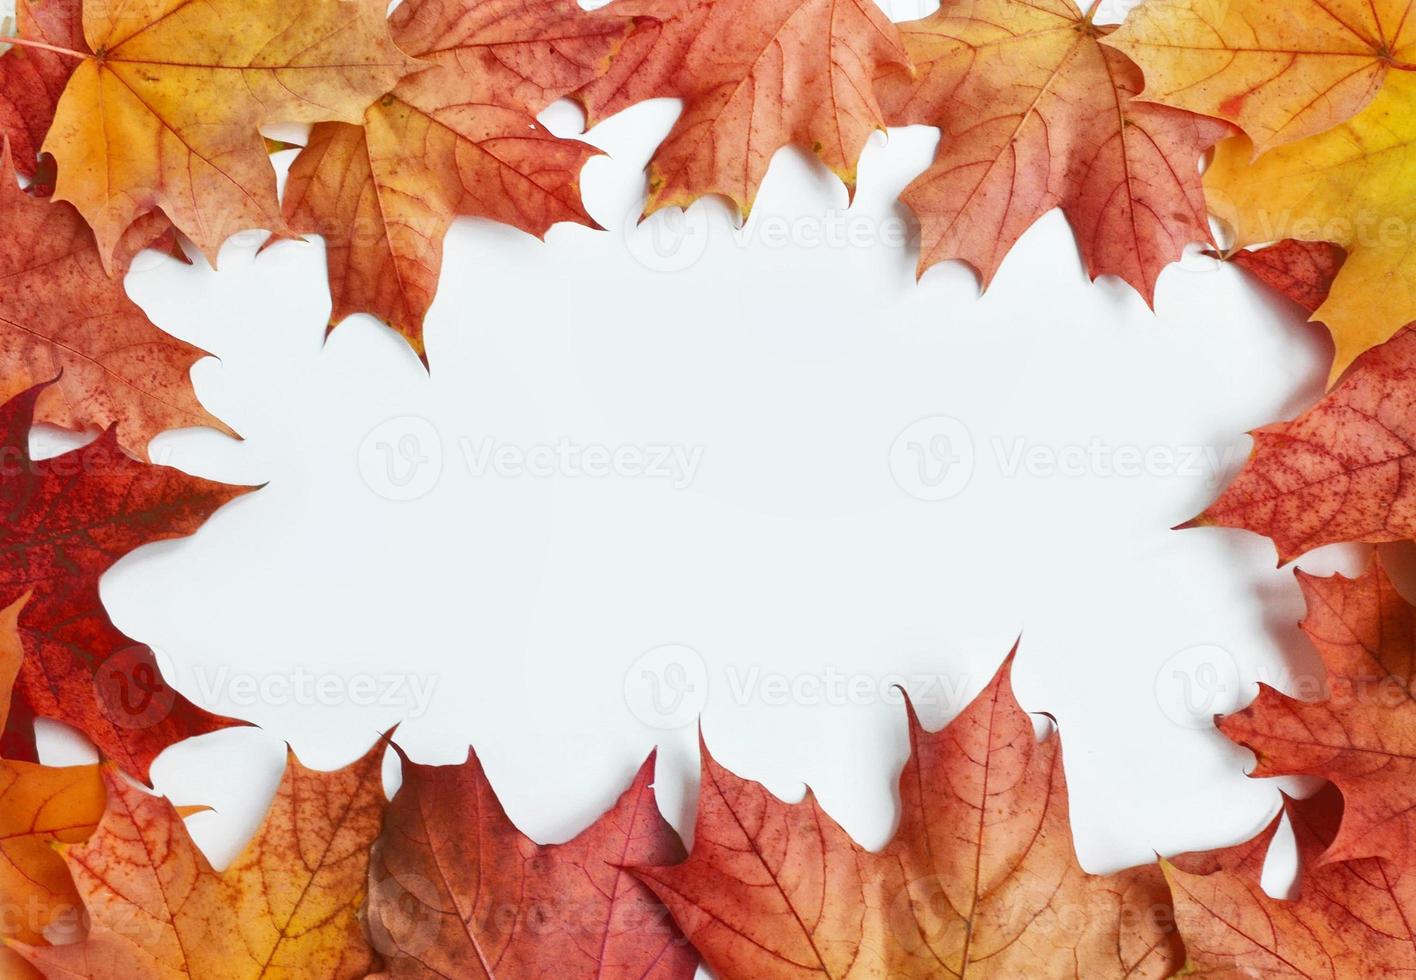 Bright and colorful autumn leaves photo